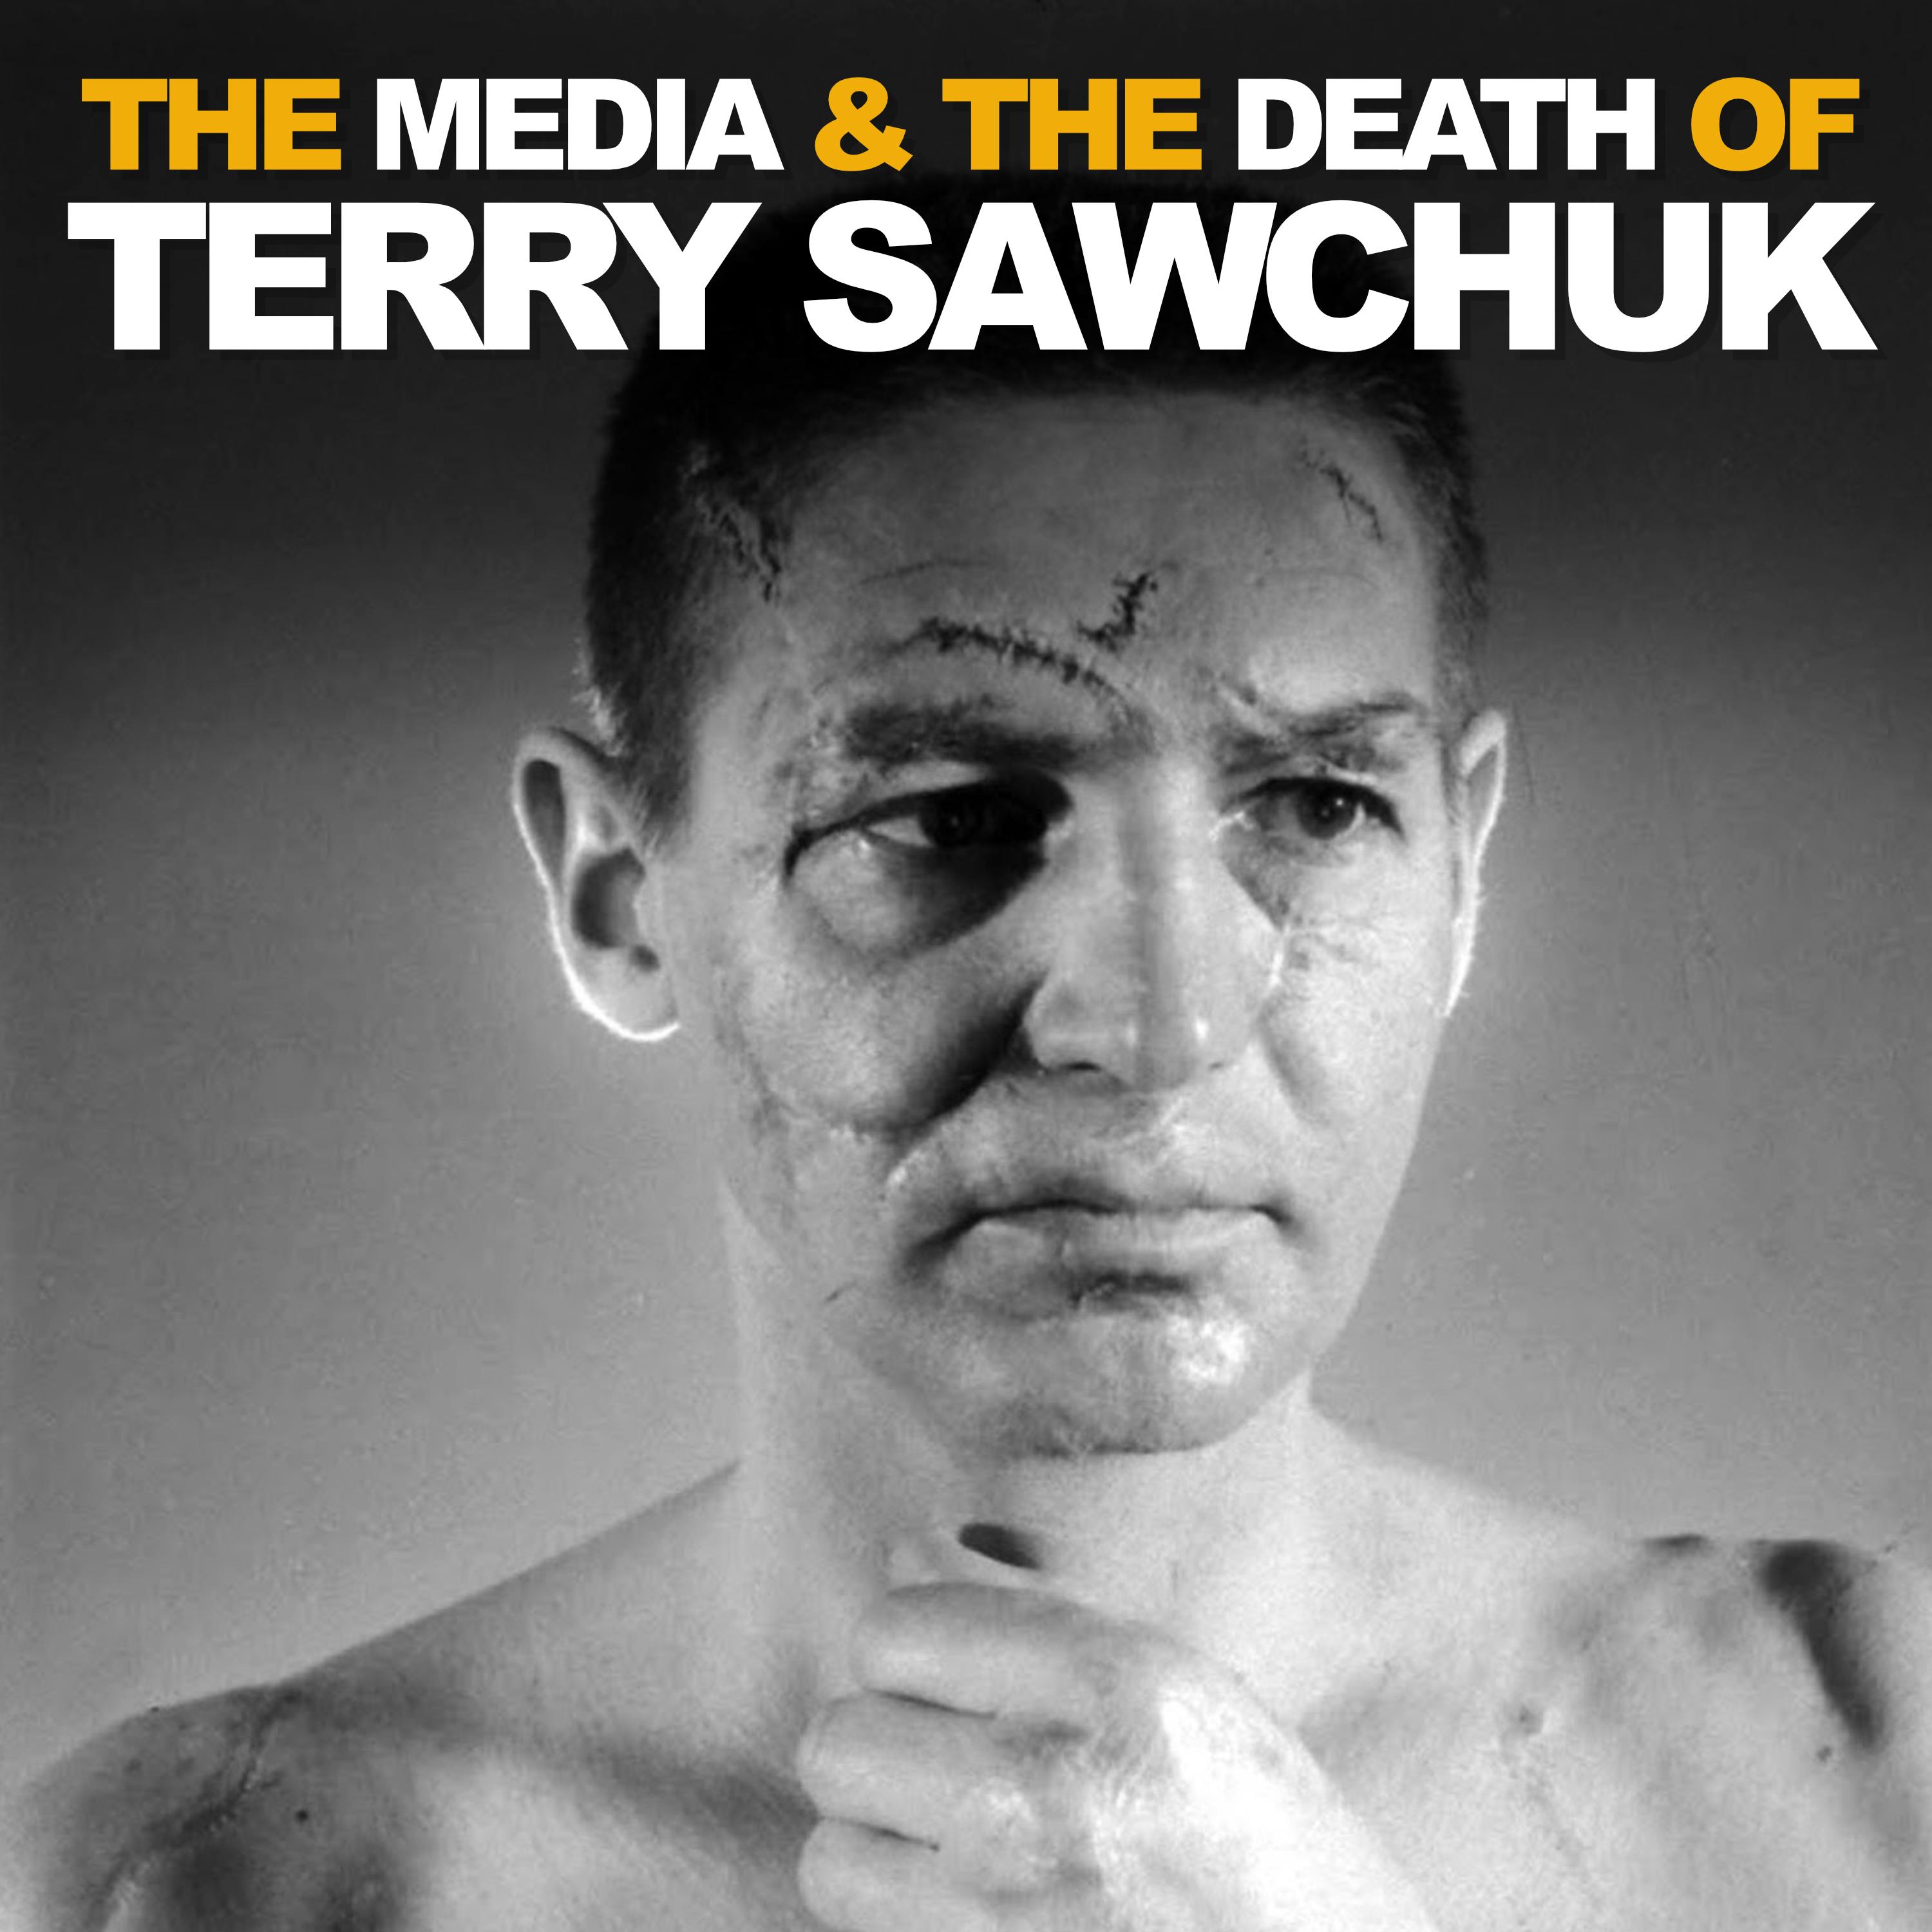 Part 2: The Media and the Death of Terry Sawchuk